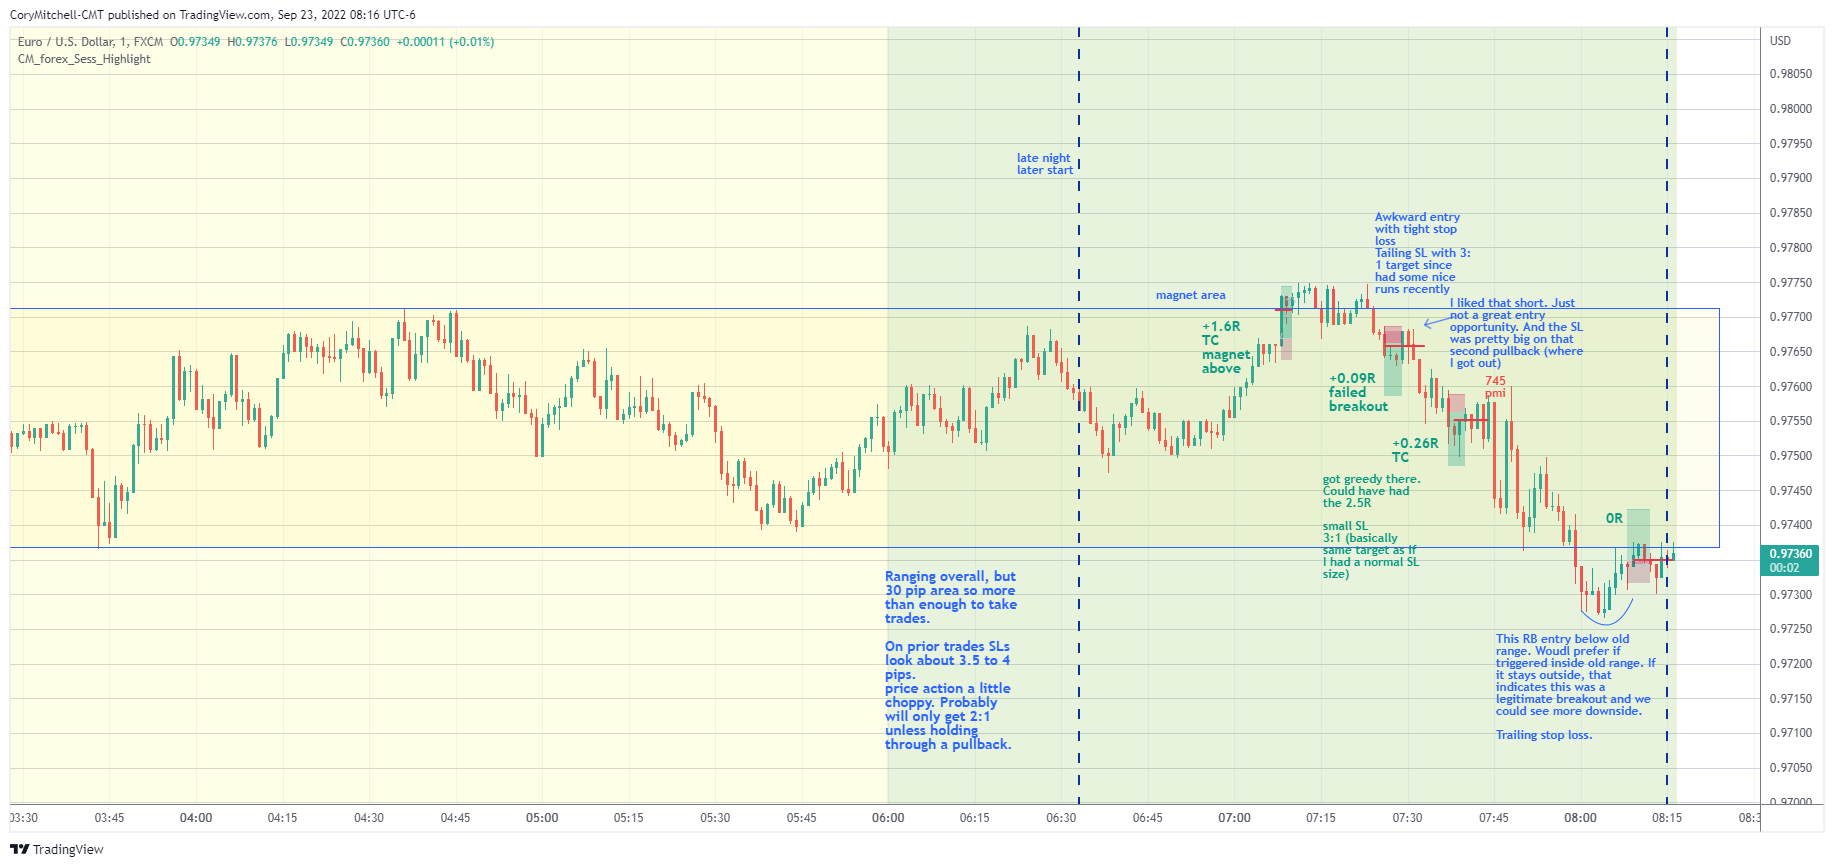 EURUSD day trading strategy examples Sept 23